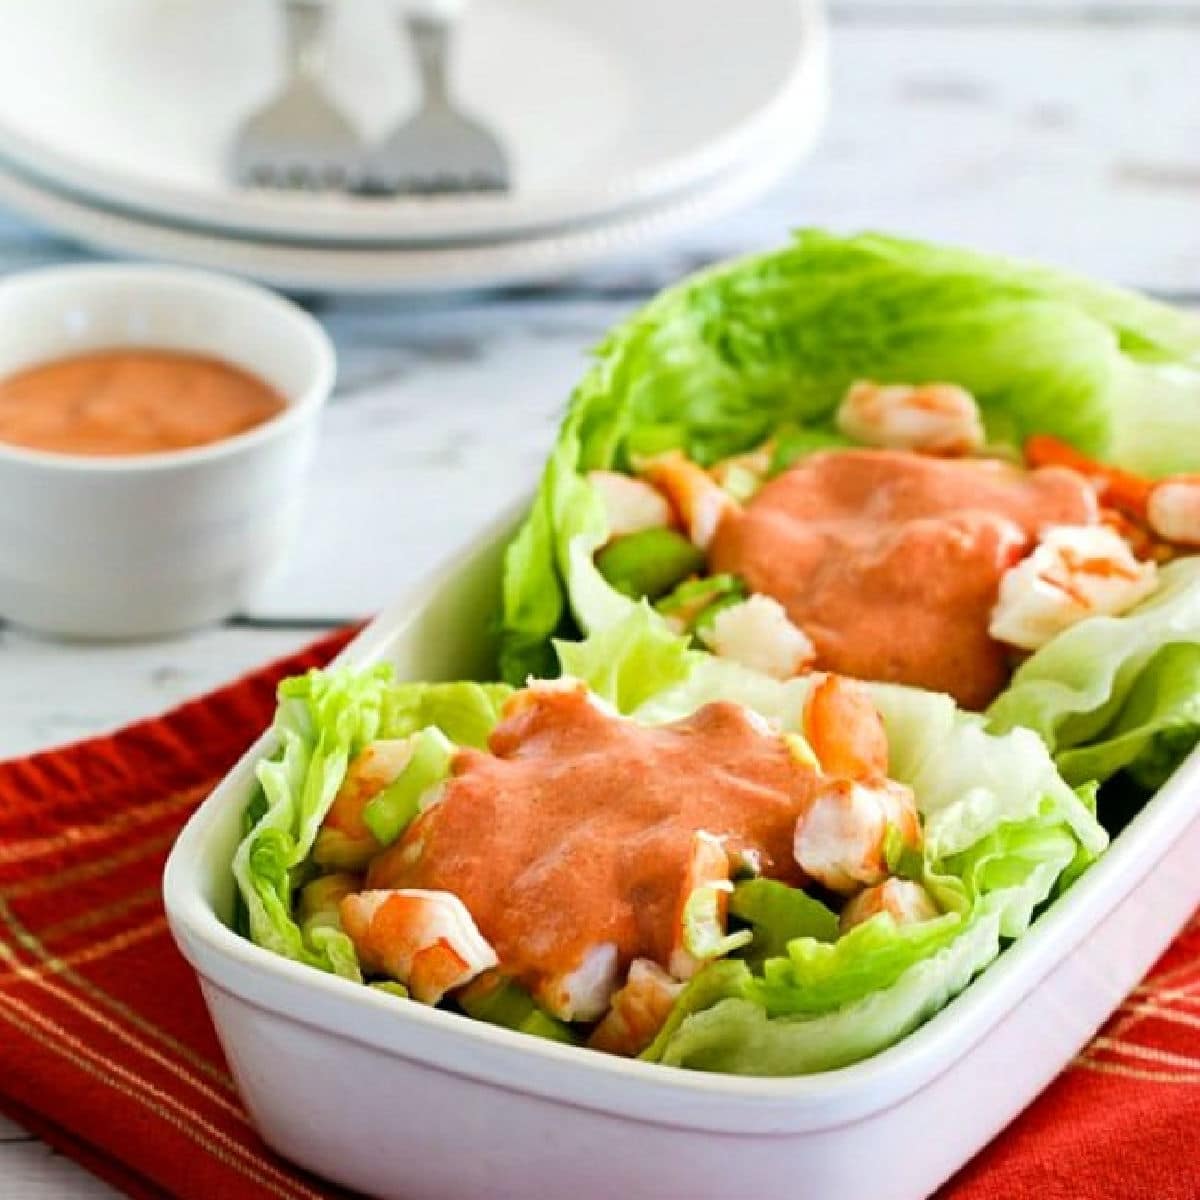 Square image for Shrimp lettuce wraps shown with two lettuce wraps in dish with cocktail sauce on the shrimp and on the side.